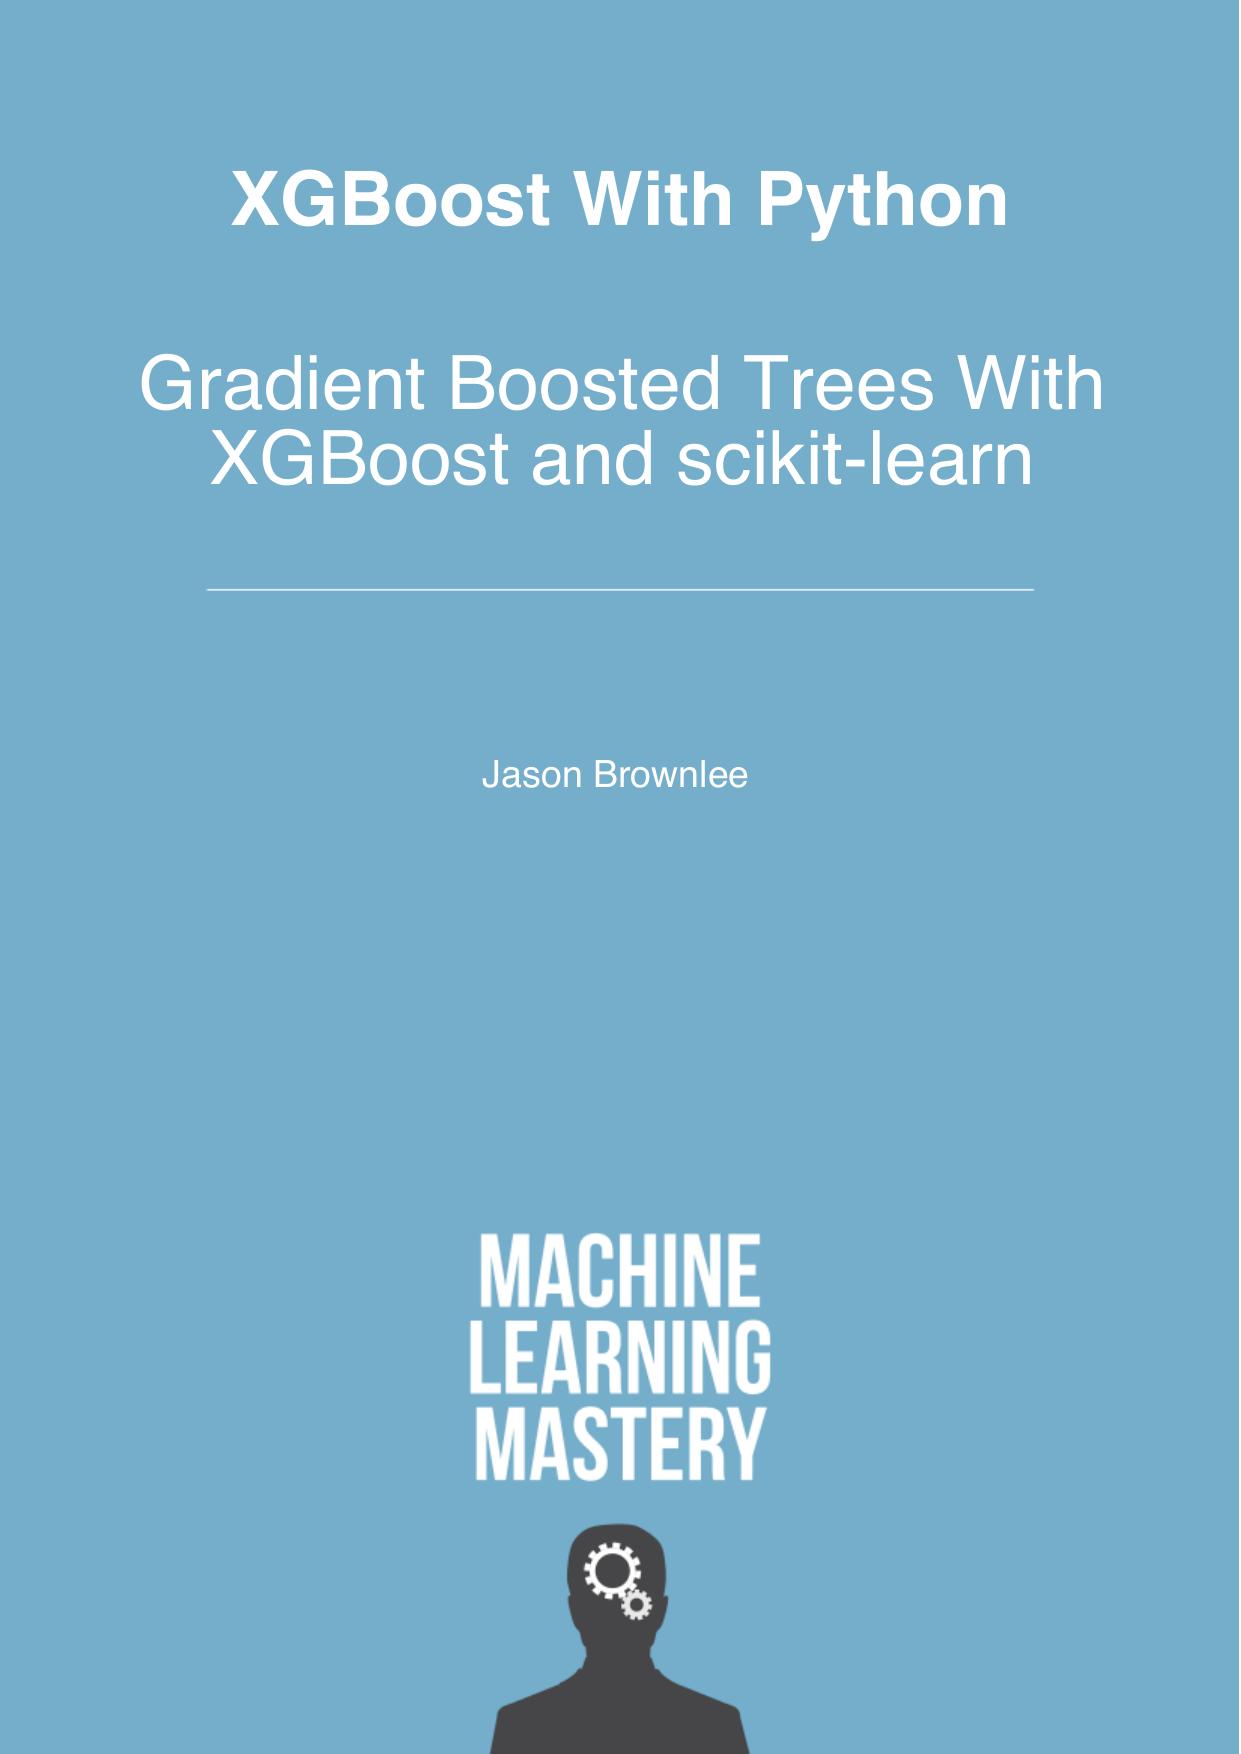 XGBoost with Python Gradient Boosted Trees with XGBoost and scikit-learn